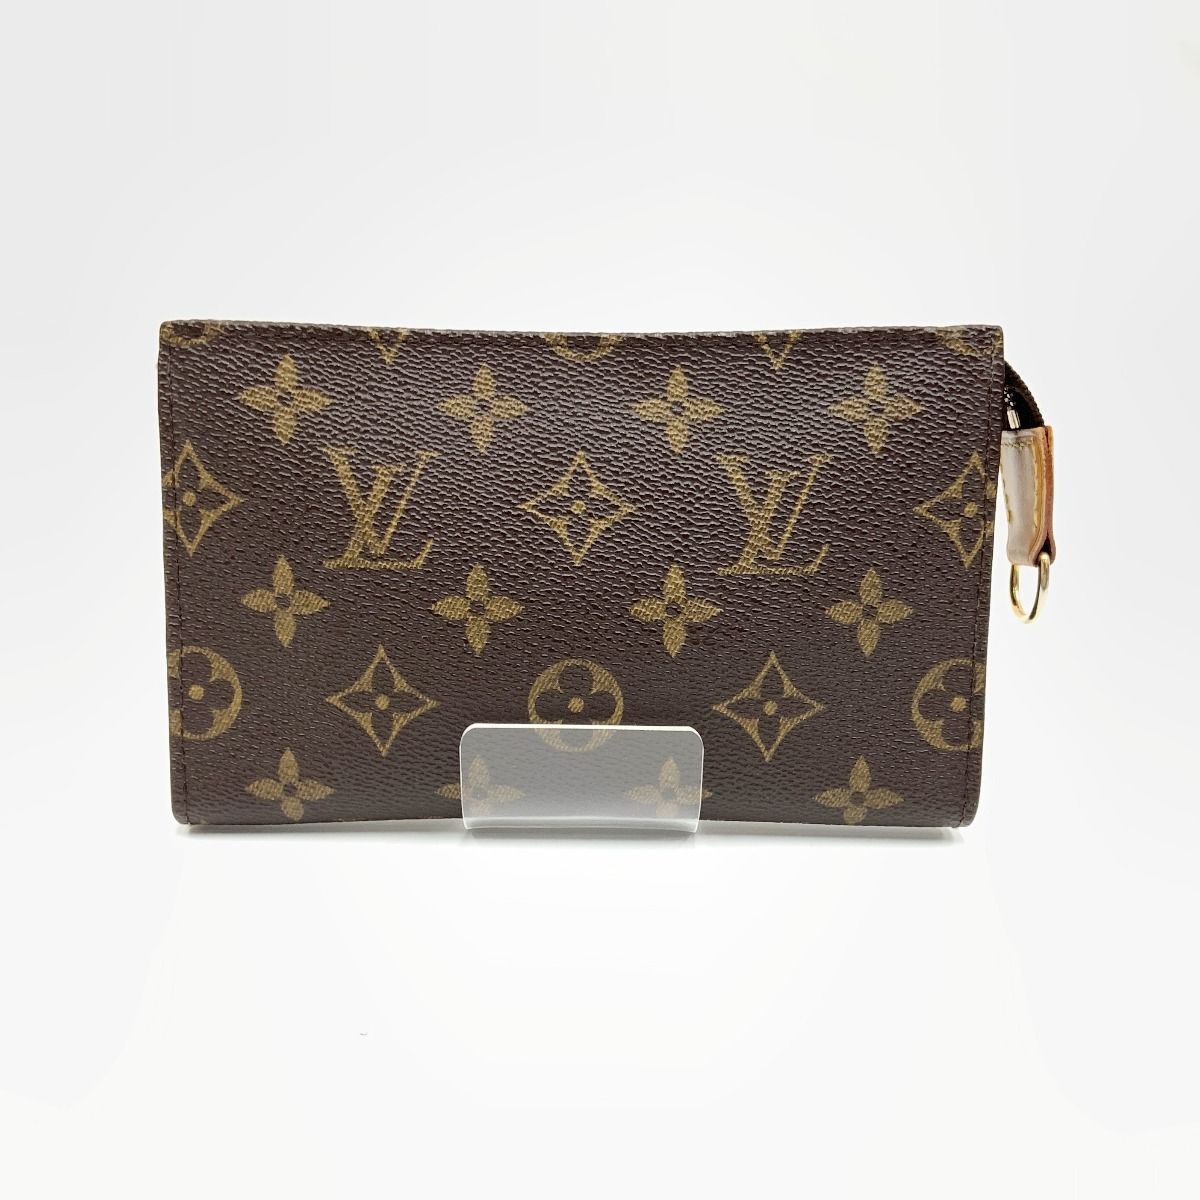 〇〇LOUIS VUITTON ルイヴィトン モノグラム バケットPM 付属品 ポーチ